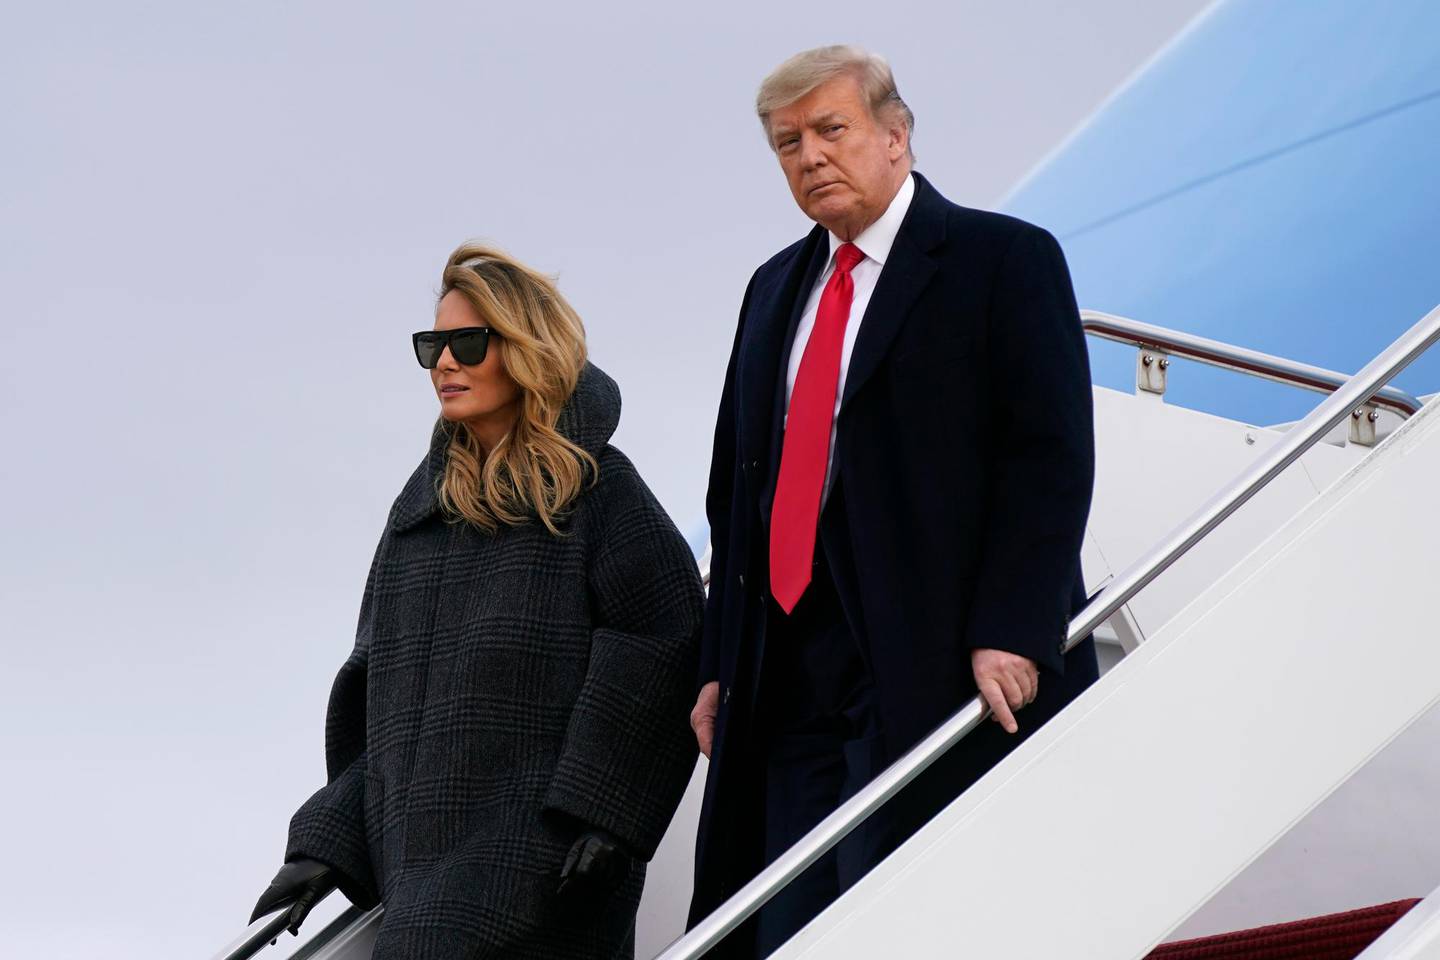 President Donald Trump and first lady Melania Trump step off Air Force One at Andrews Air Force Base, Md., Thursday, Dec. 31, 2020. Trump is returning to Washington after visiting his Mar-a-Lago resort. (AP Photo/Patrick Semansky)